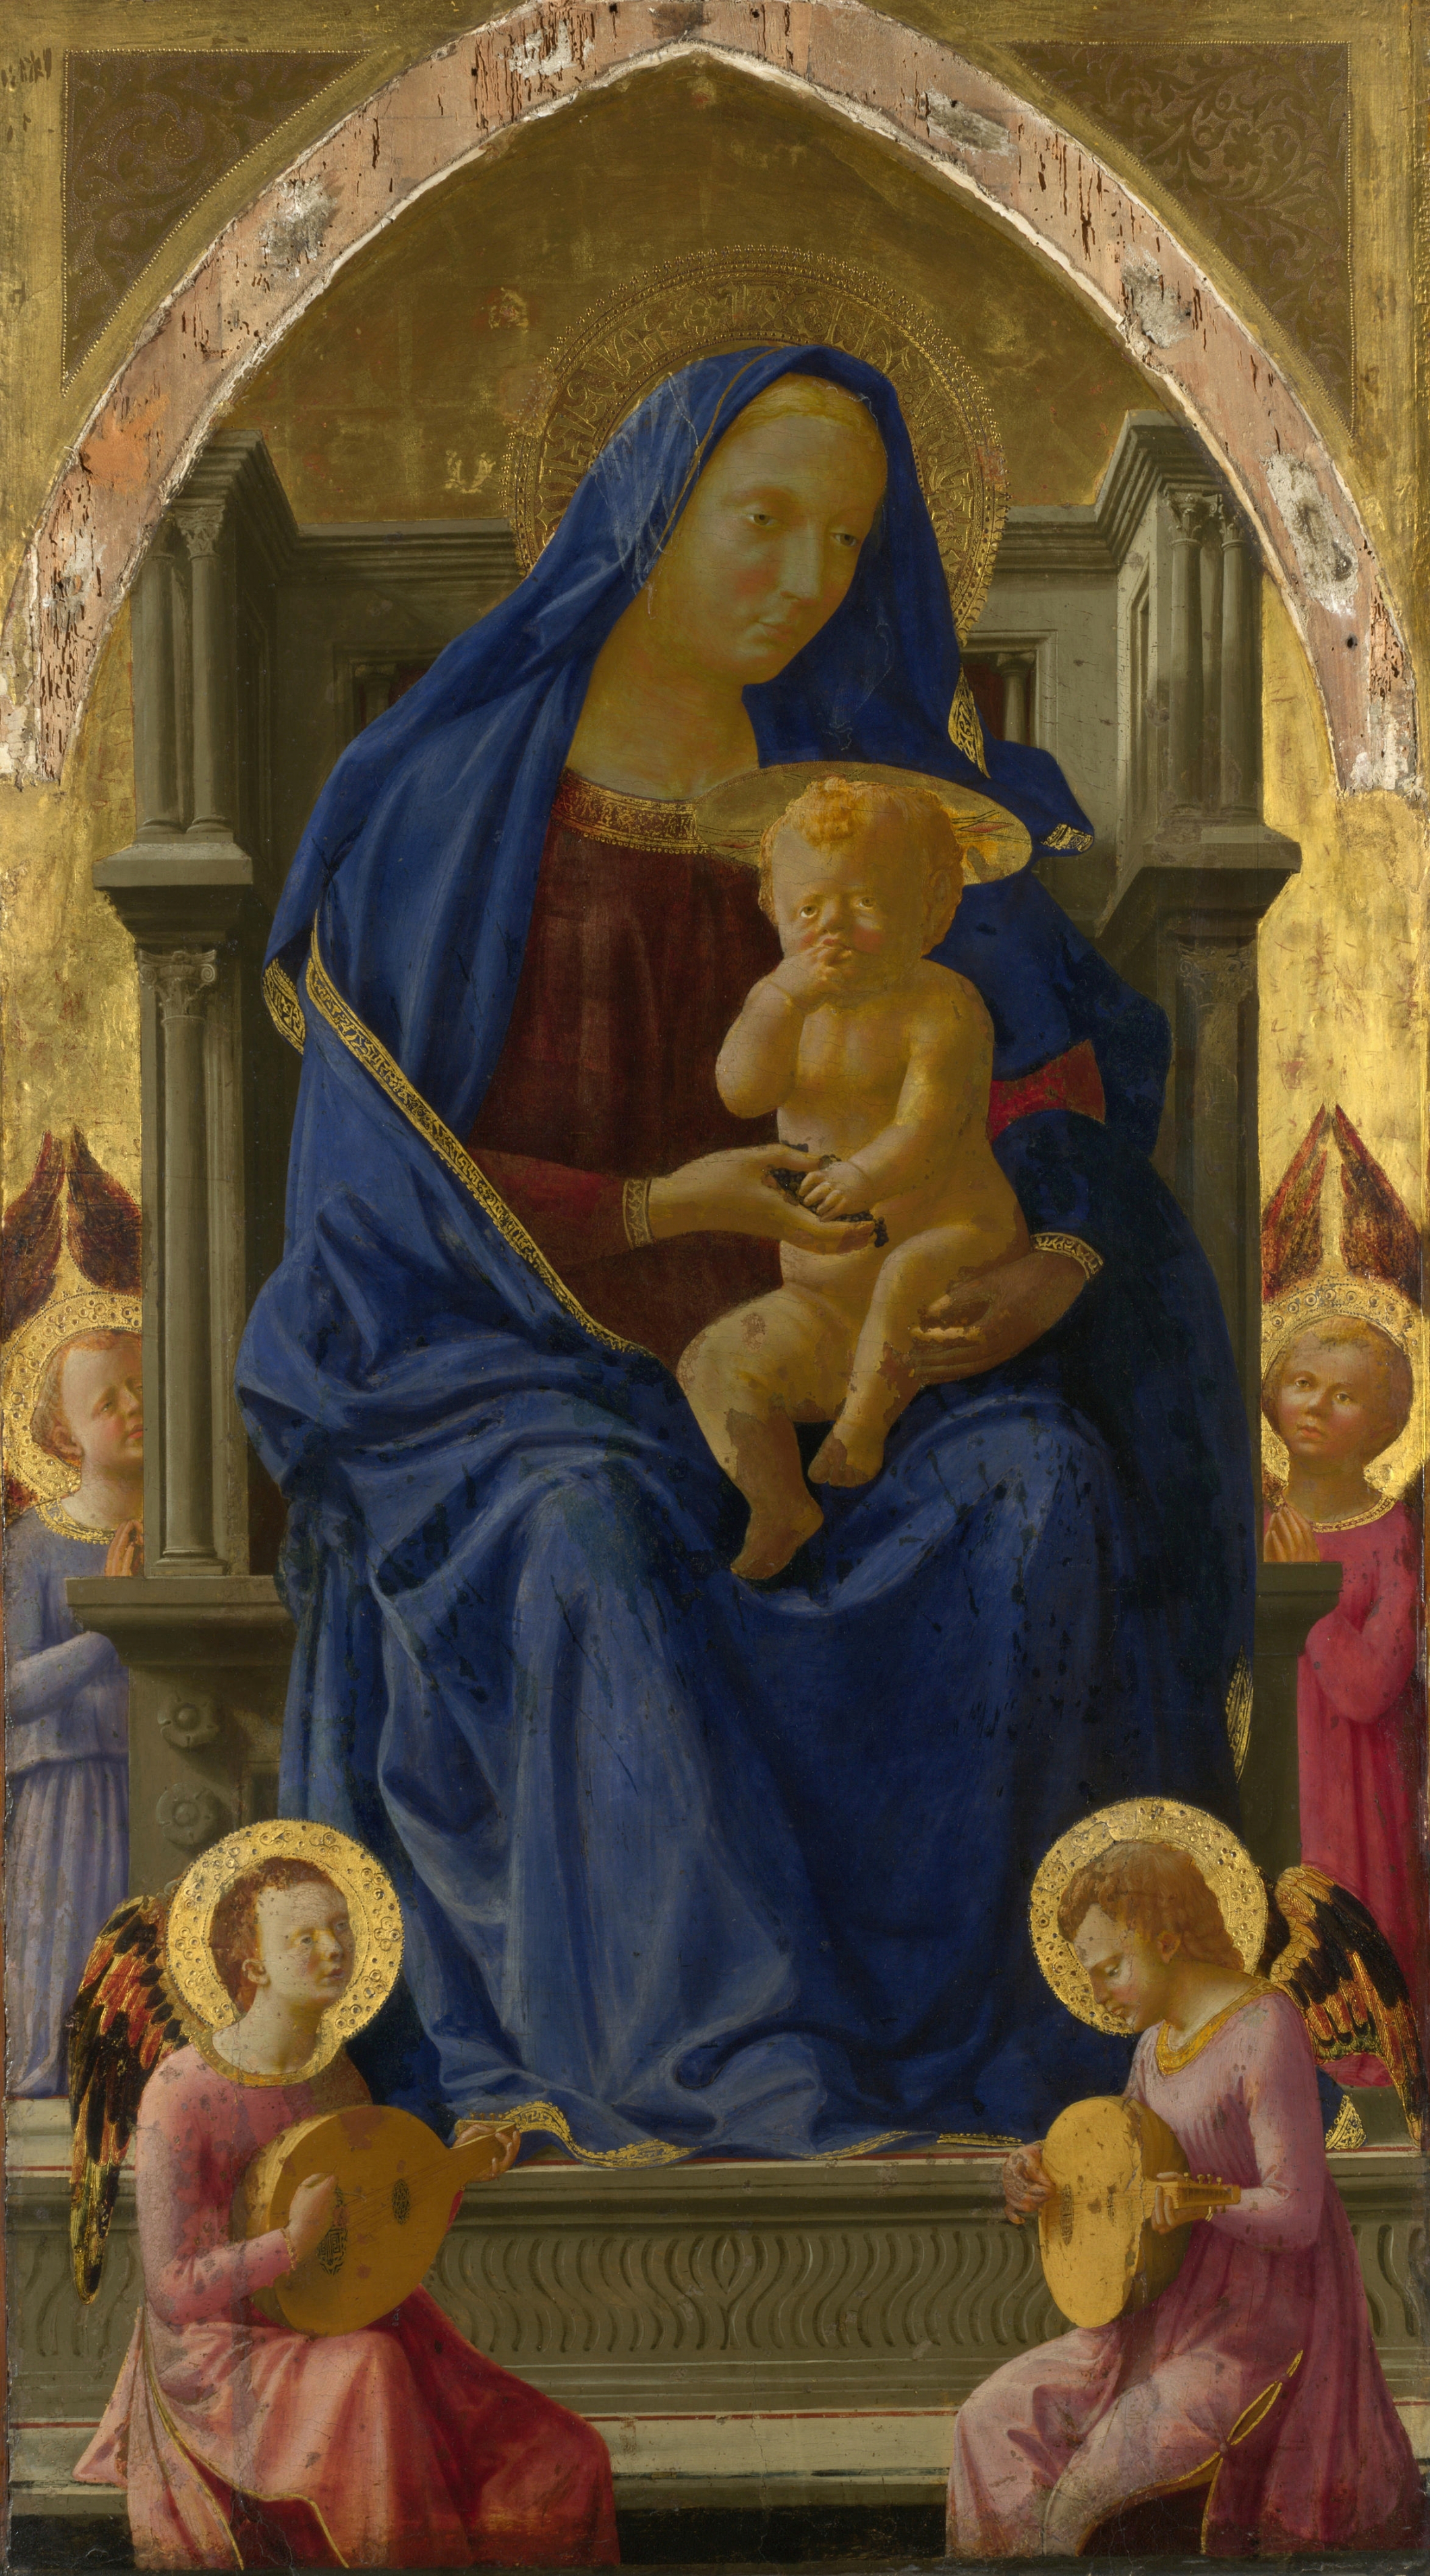 The Virgin and Child by  Masaccio - 1426 - 134.8 x 73.5 cm National Gallery